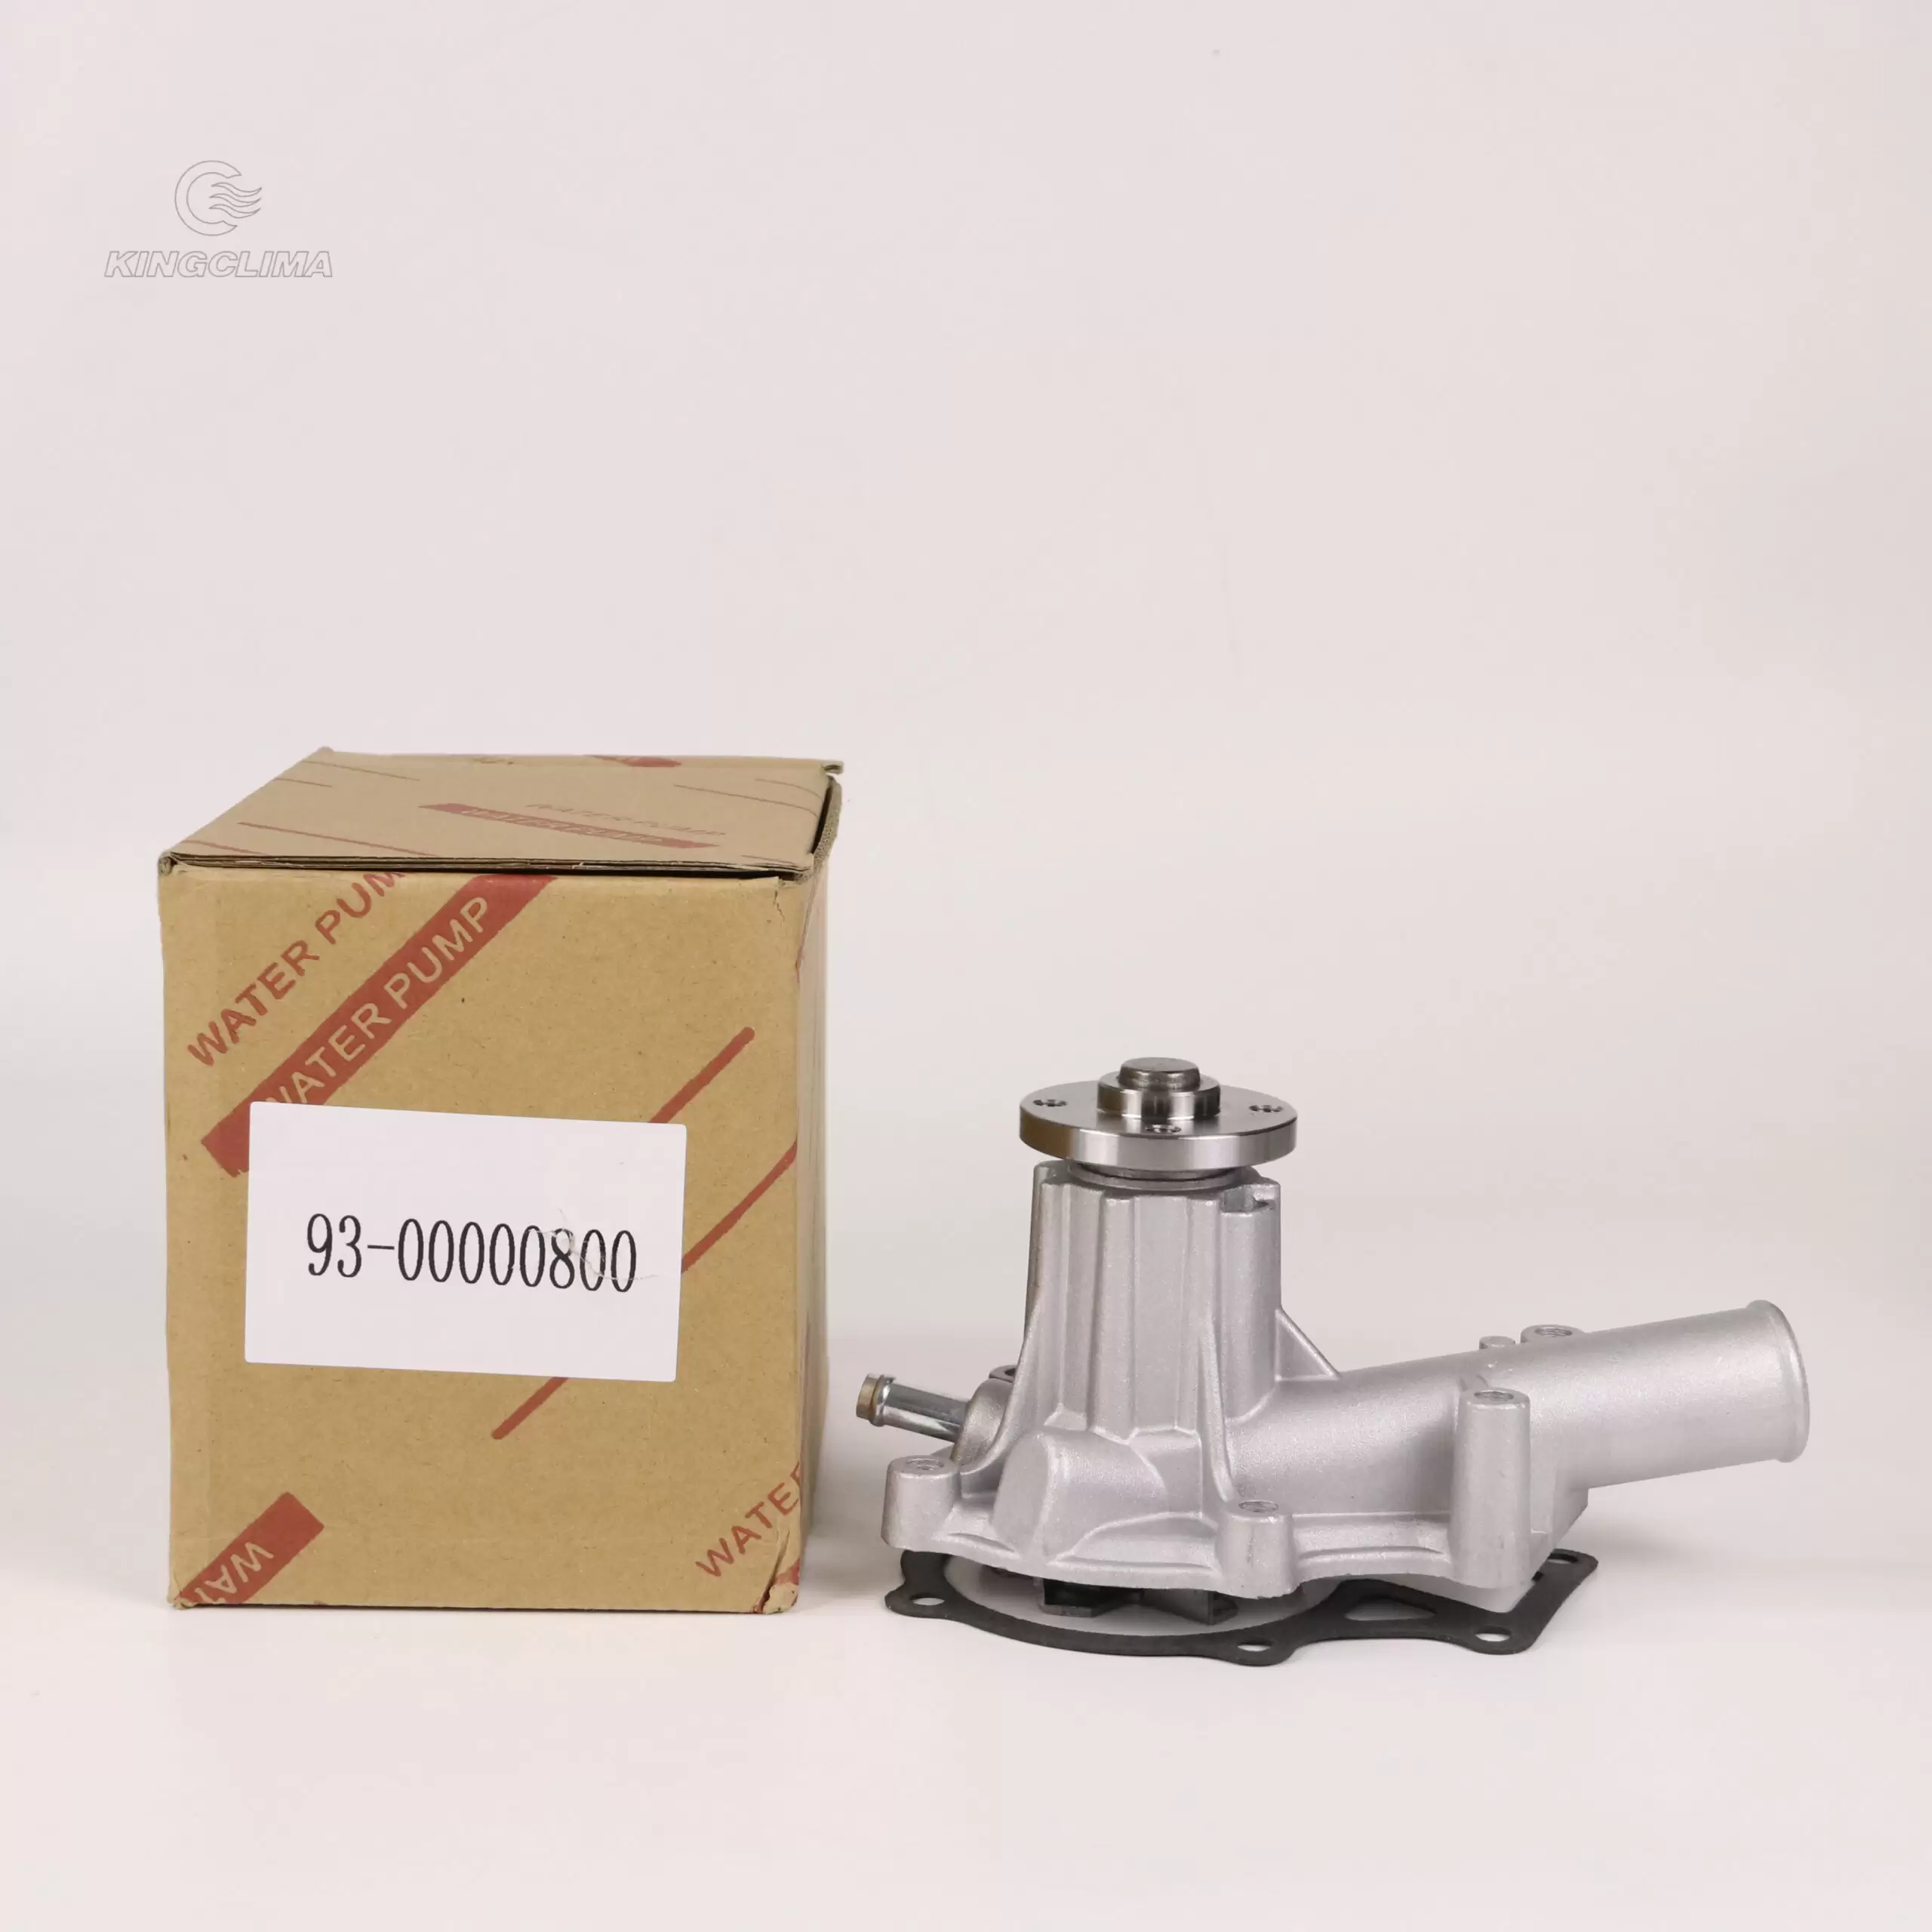 aftermarket water pump 93-00008-00 for carrier transicold refrigeration units